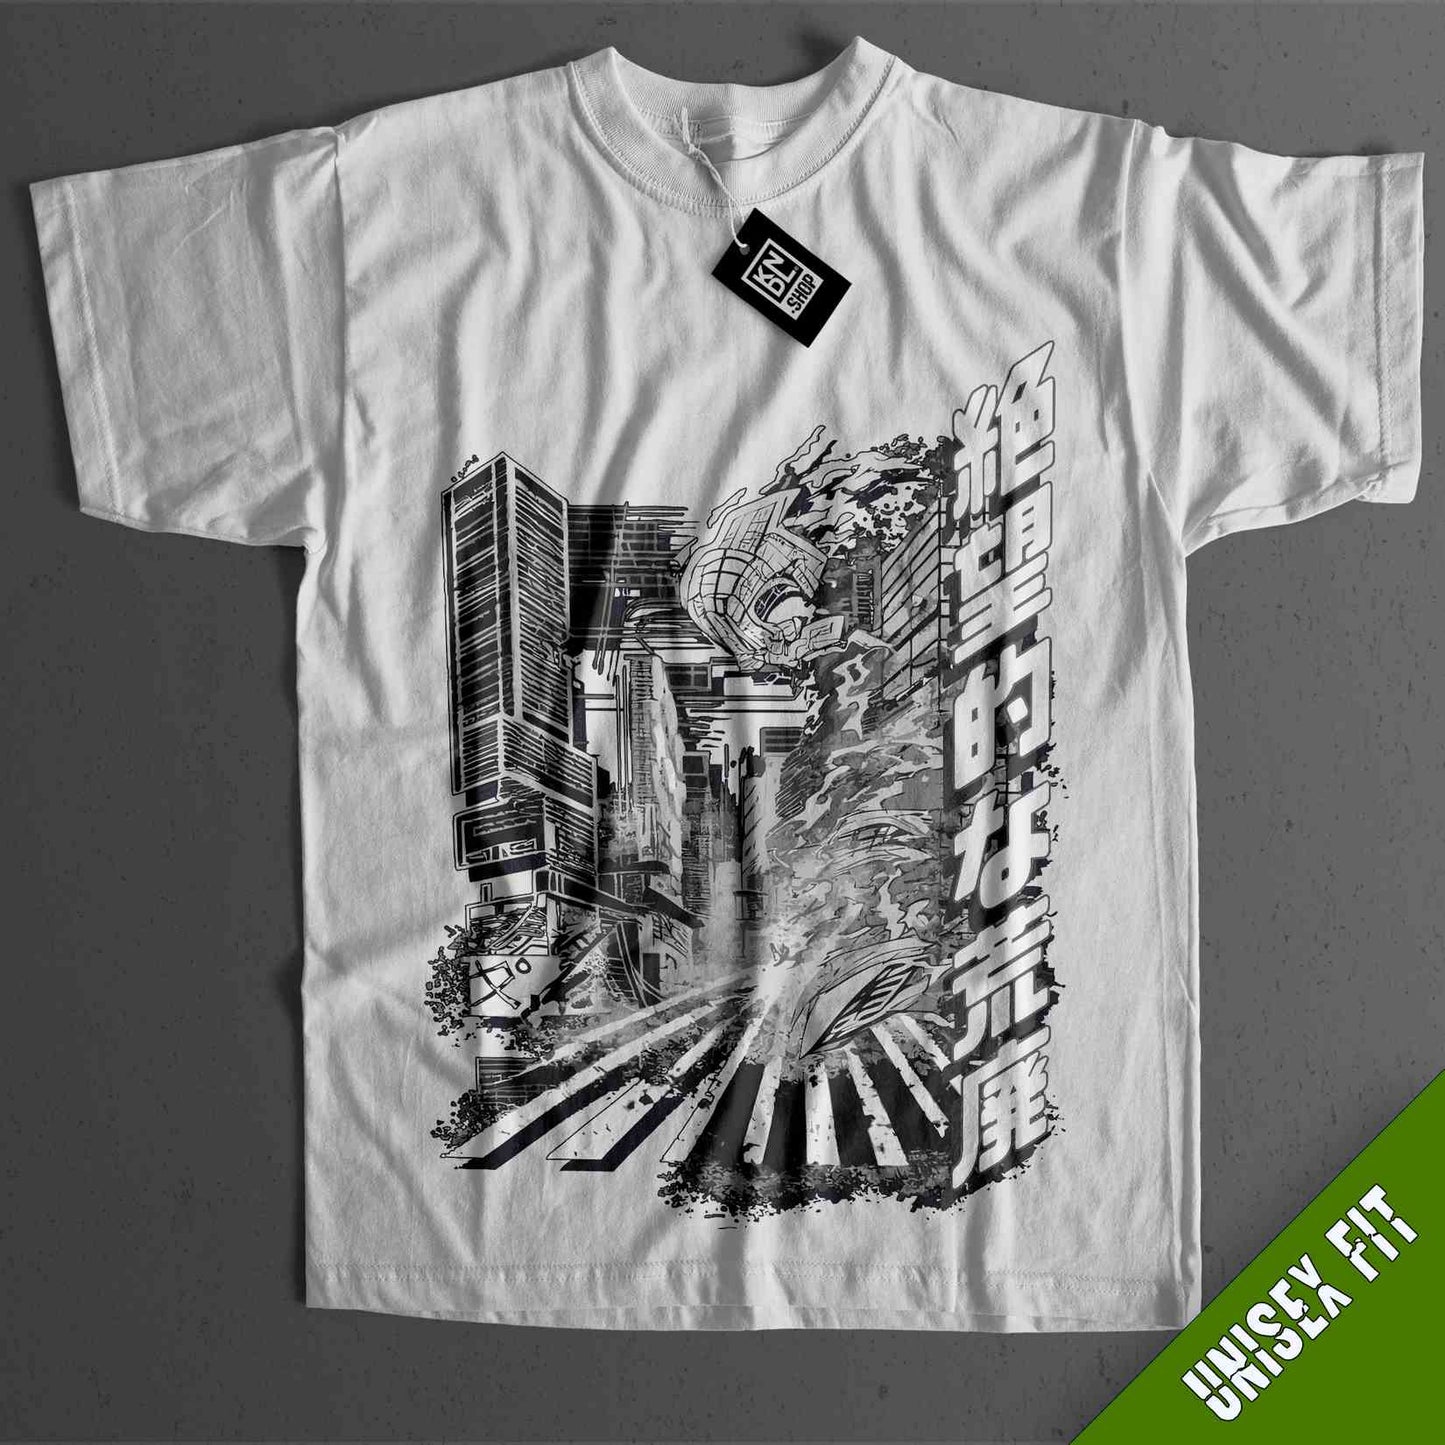 a white t - shirt with a black and white image of a city